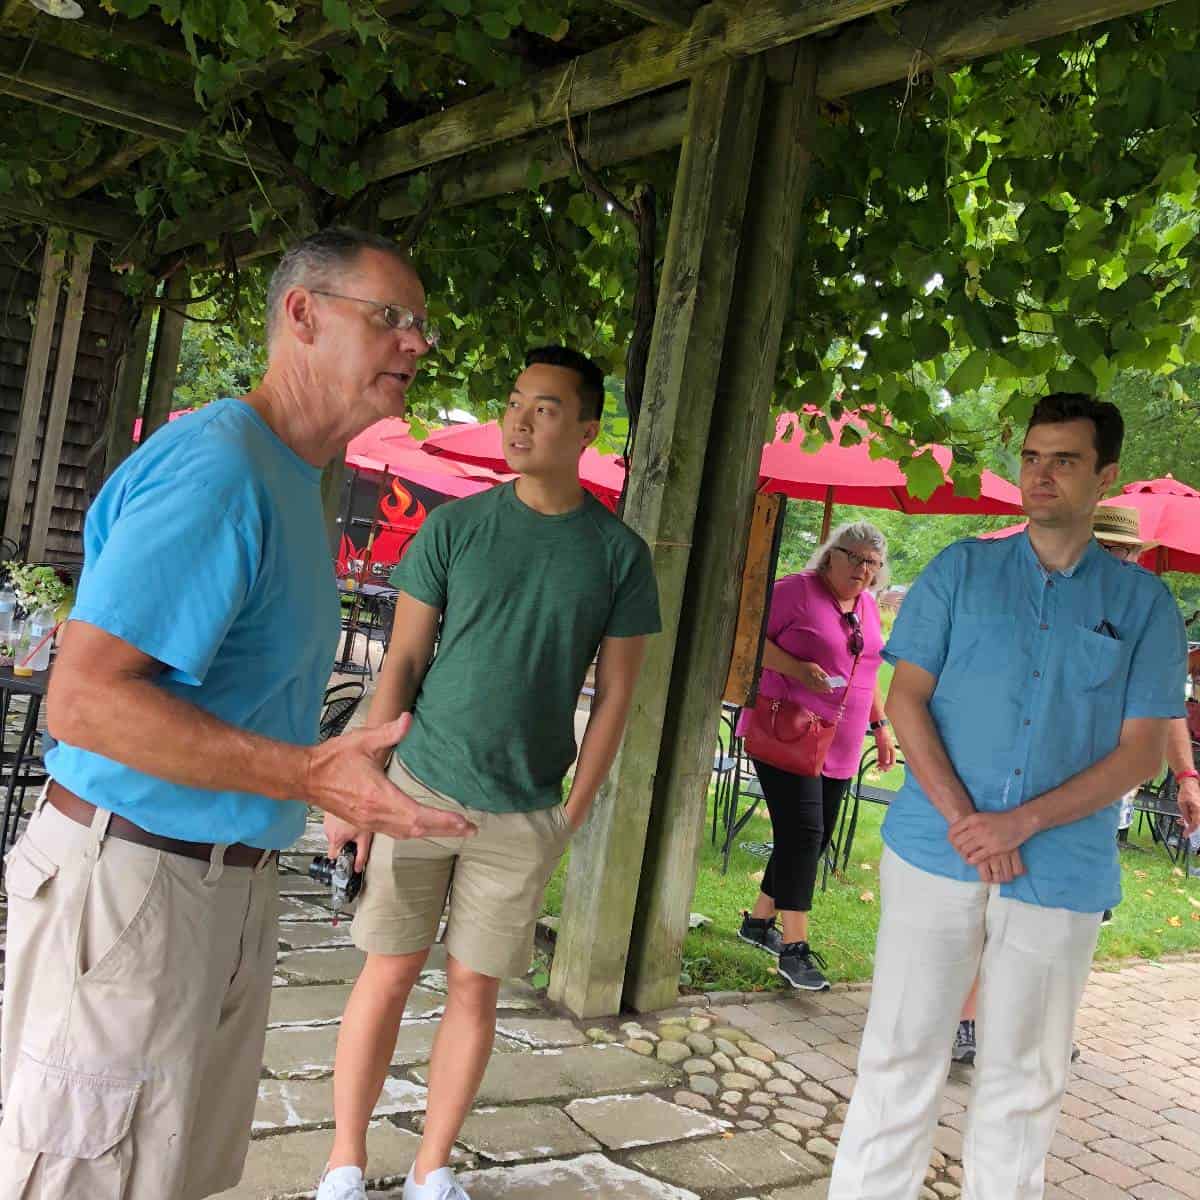 visitors on a tour at Westport Rivers Winery.